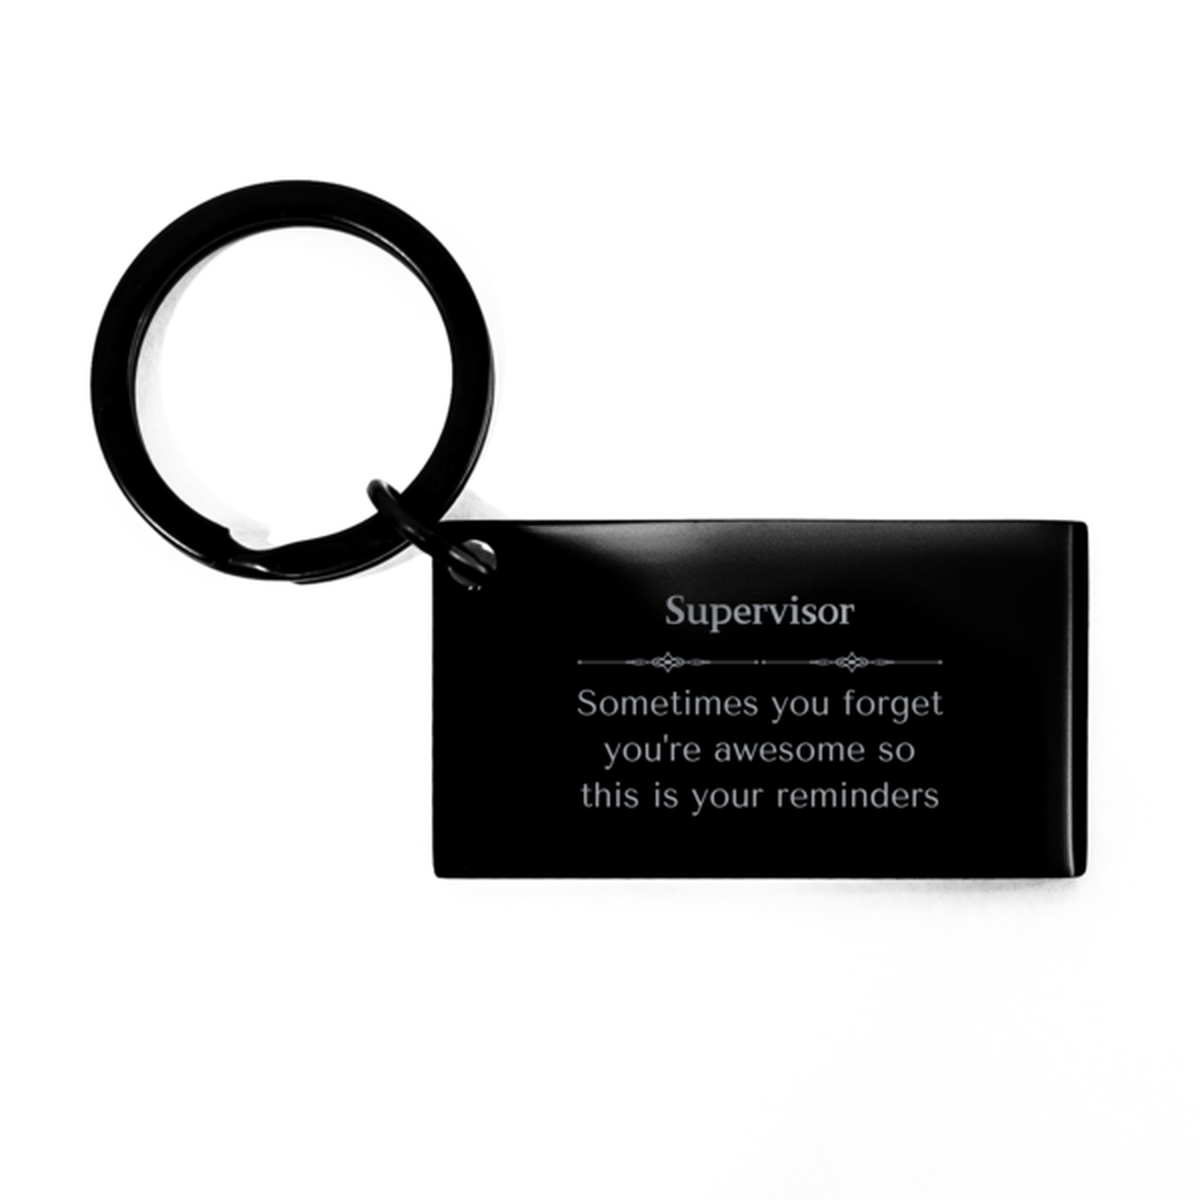 Sentimental Supervisor Keychain, Watchmaker Sometimes you forget you're awesome so this is your reminders, Graduation Christmas Birthday Gifts for Supervisor, Men, Women, Coworkers